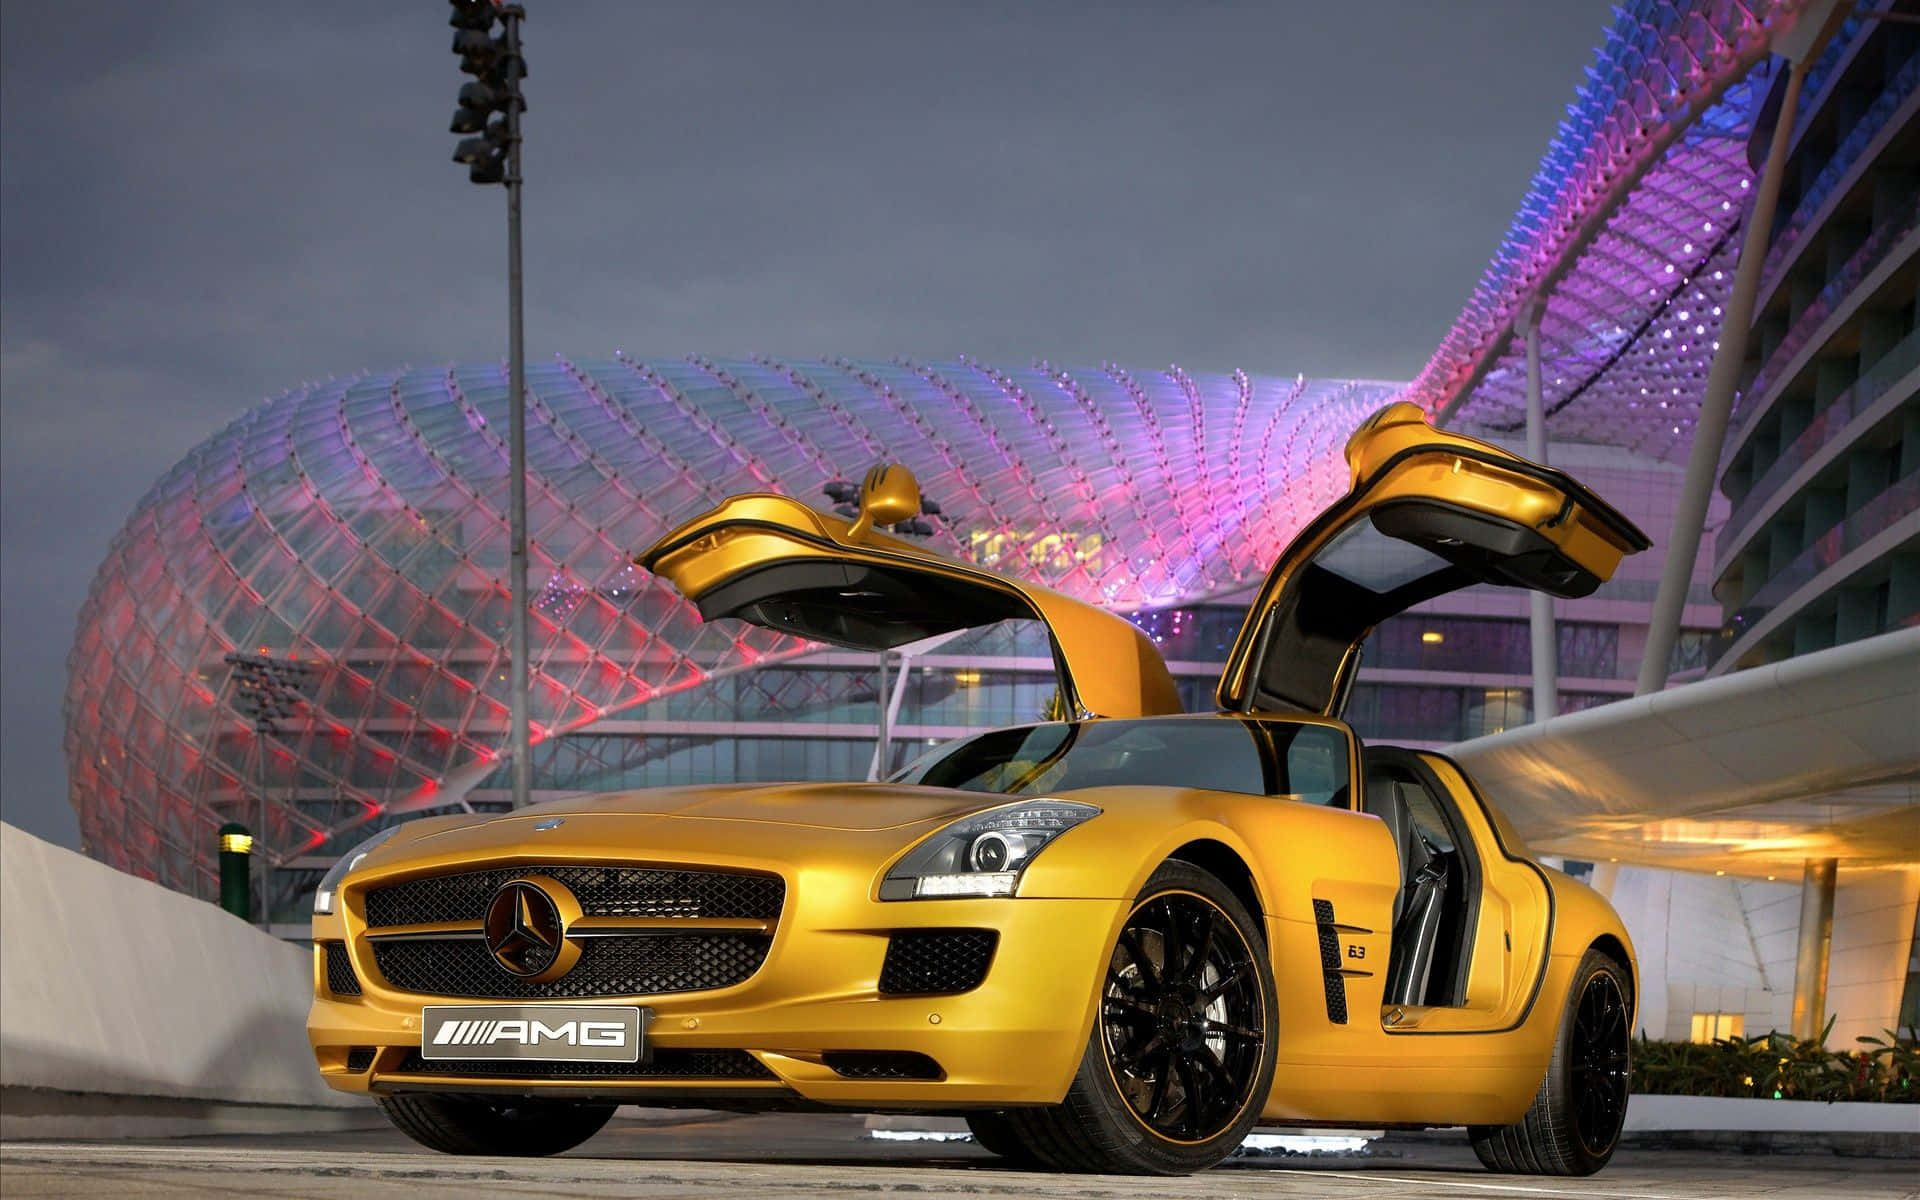 Magnificent Gold Cars